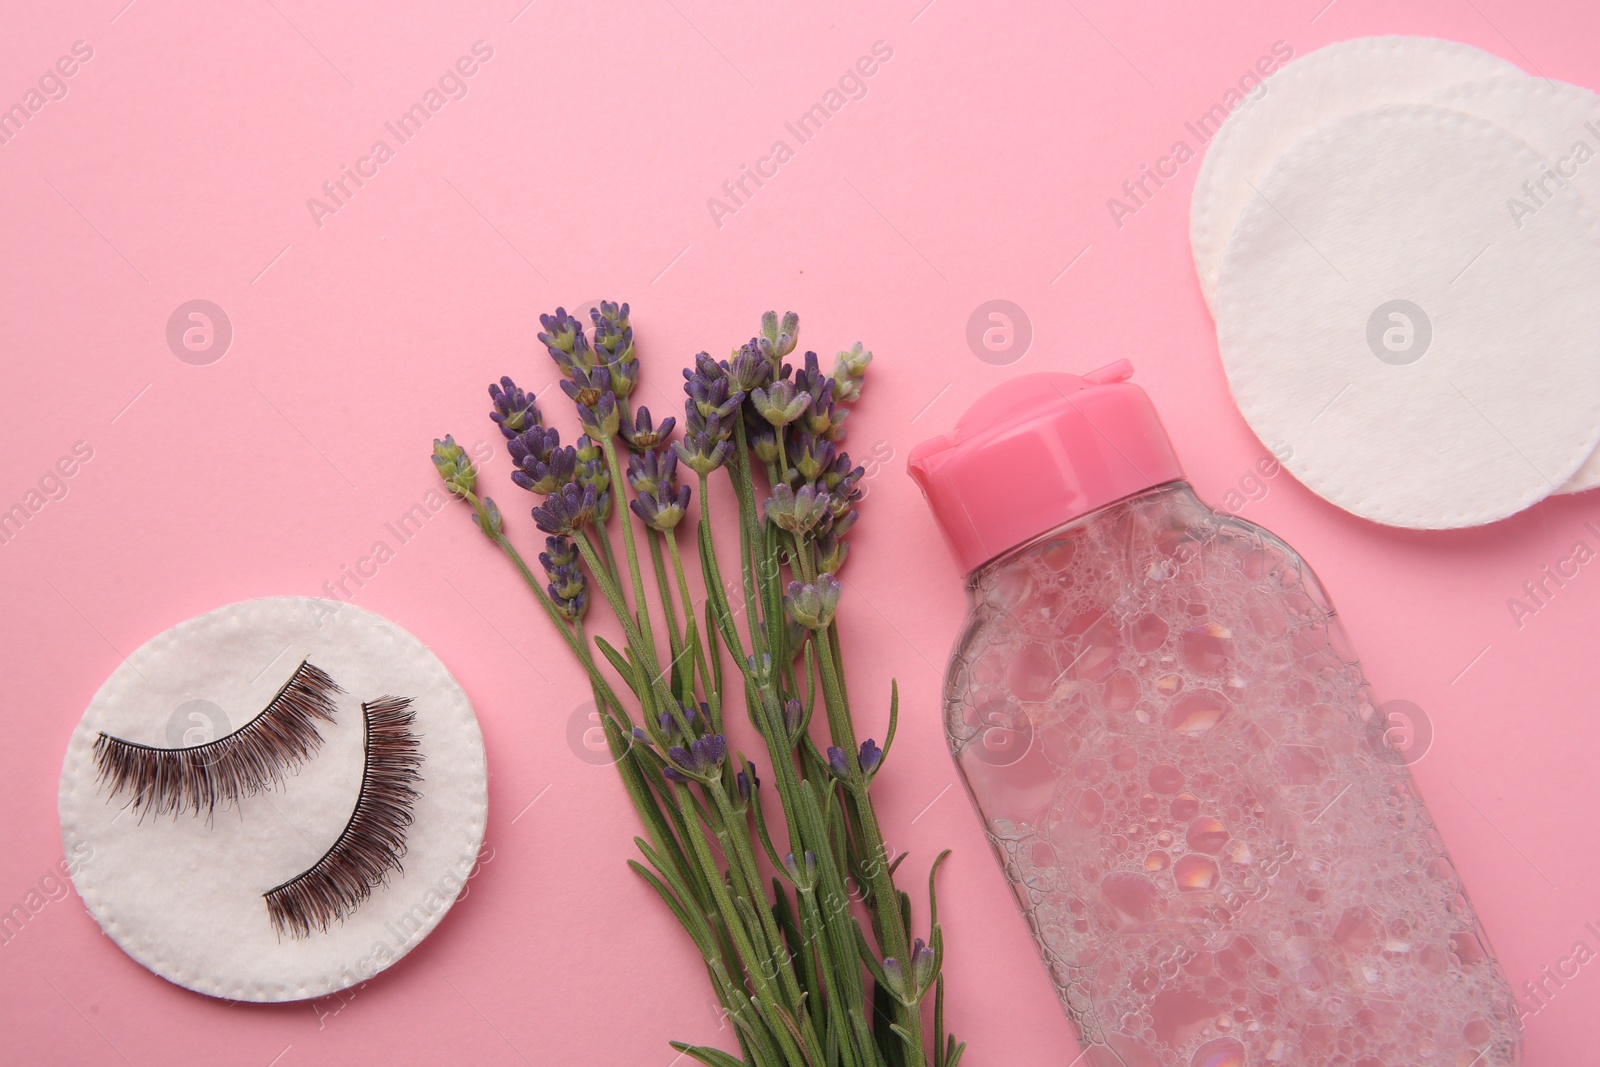 Photo of Bottle of makeup remover, lavender, cotton pads and false eyelashes on pink background, flat lay